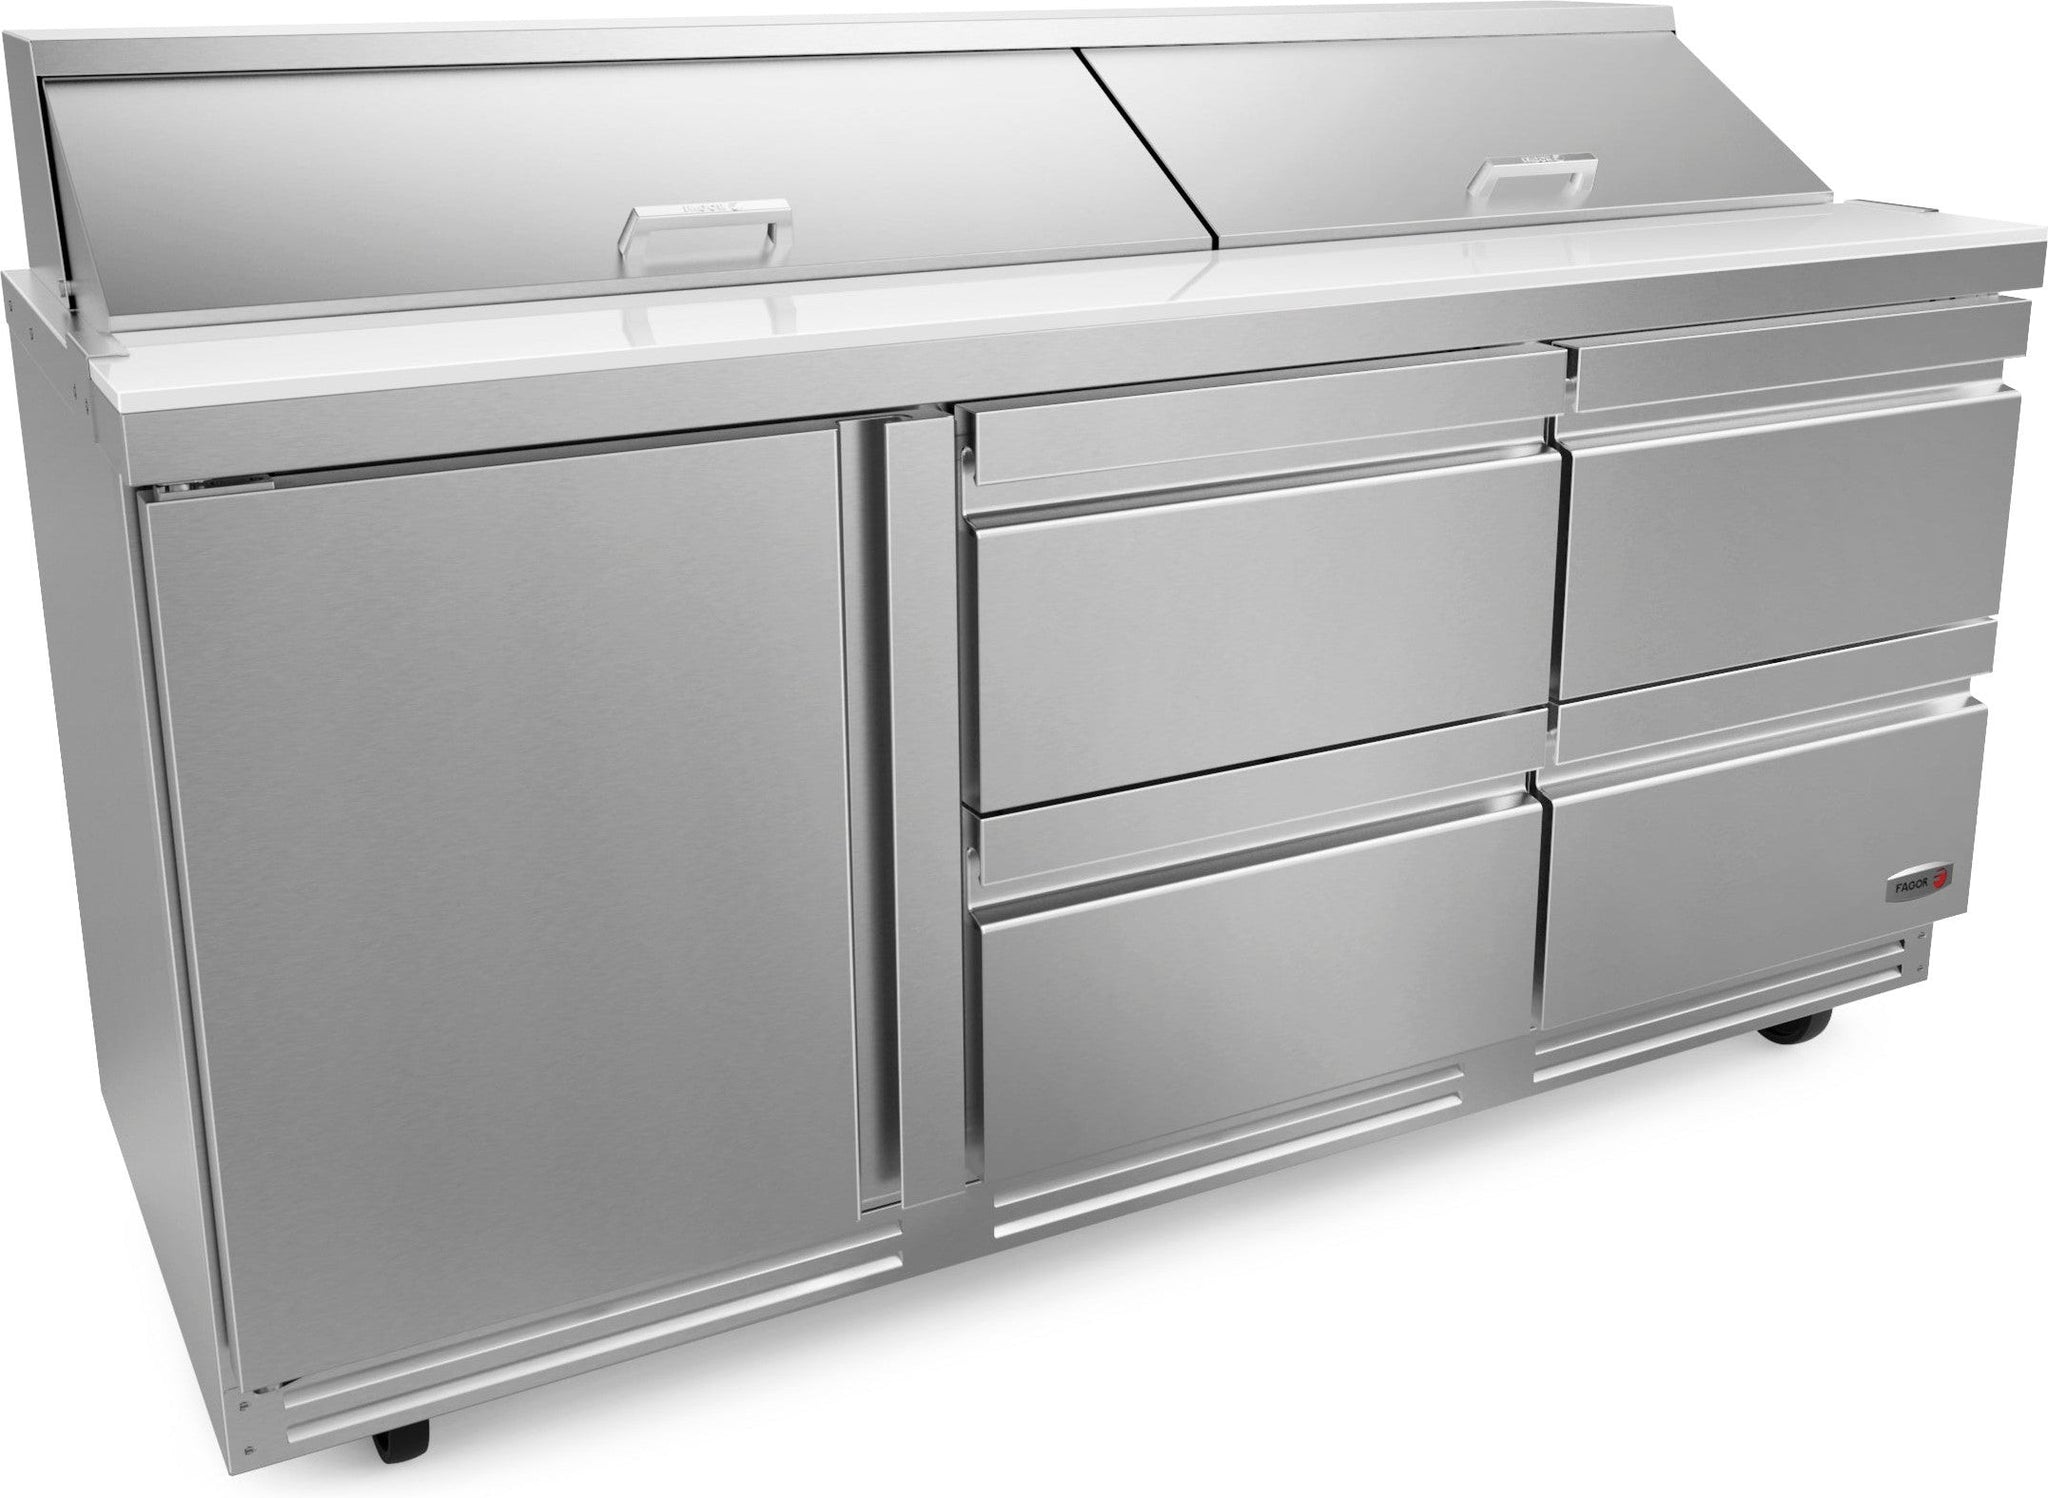 Fagor - 115 V, 18 cu. ft. Single Door Refrigerated Salad/Sandwich Prep Table With Four Drawer - FST-72-18-D4-N